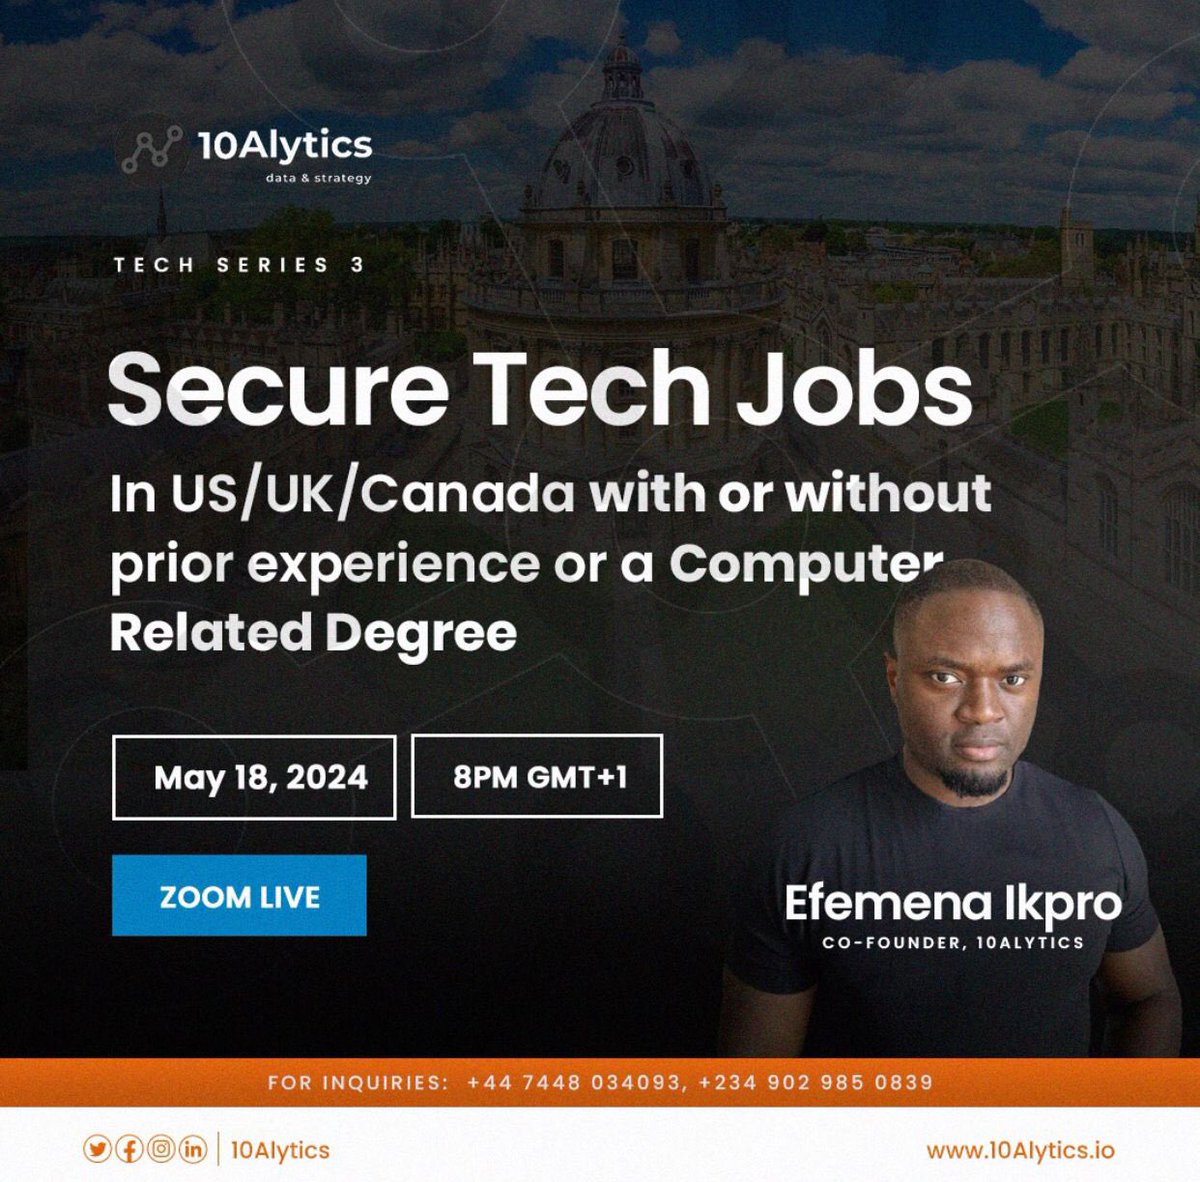 Are you a newbie in the tech industry or you want to transition to tech? This is for you. Don't miss out on @10Alytics Tech Series 3. Secure Tech Jobs in US/UK/Canada, with or without prior experience or a Computer Related Degree Date: May 18th Time : 8PM GMT+1 Location: